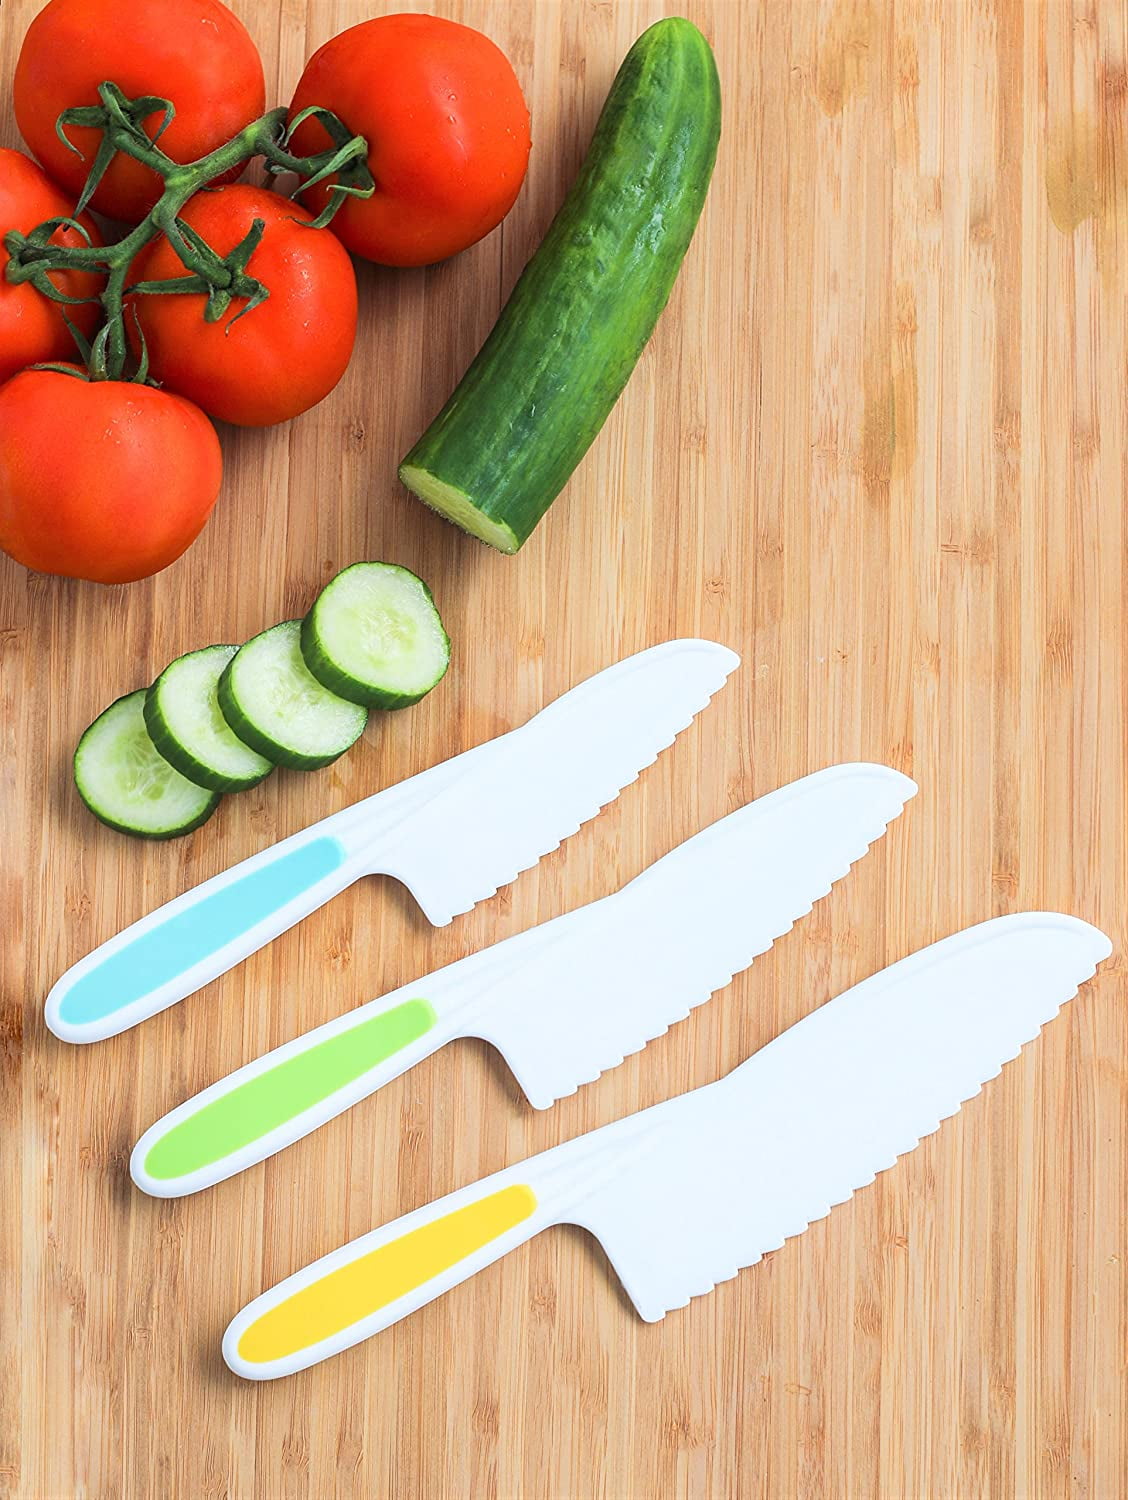 NOGIS Kids Knife Set for Cooking and Cutting Fruits, Veggies, Sandwiches &  Cake - Perfect Starter Knife Set for Little Hands in the Kitchen - 3-Piece  Nylon Knife for Kids - Fun